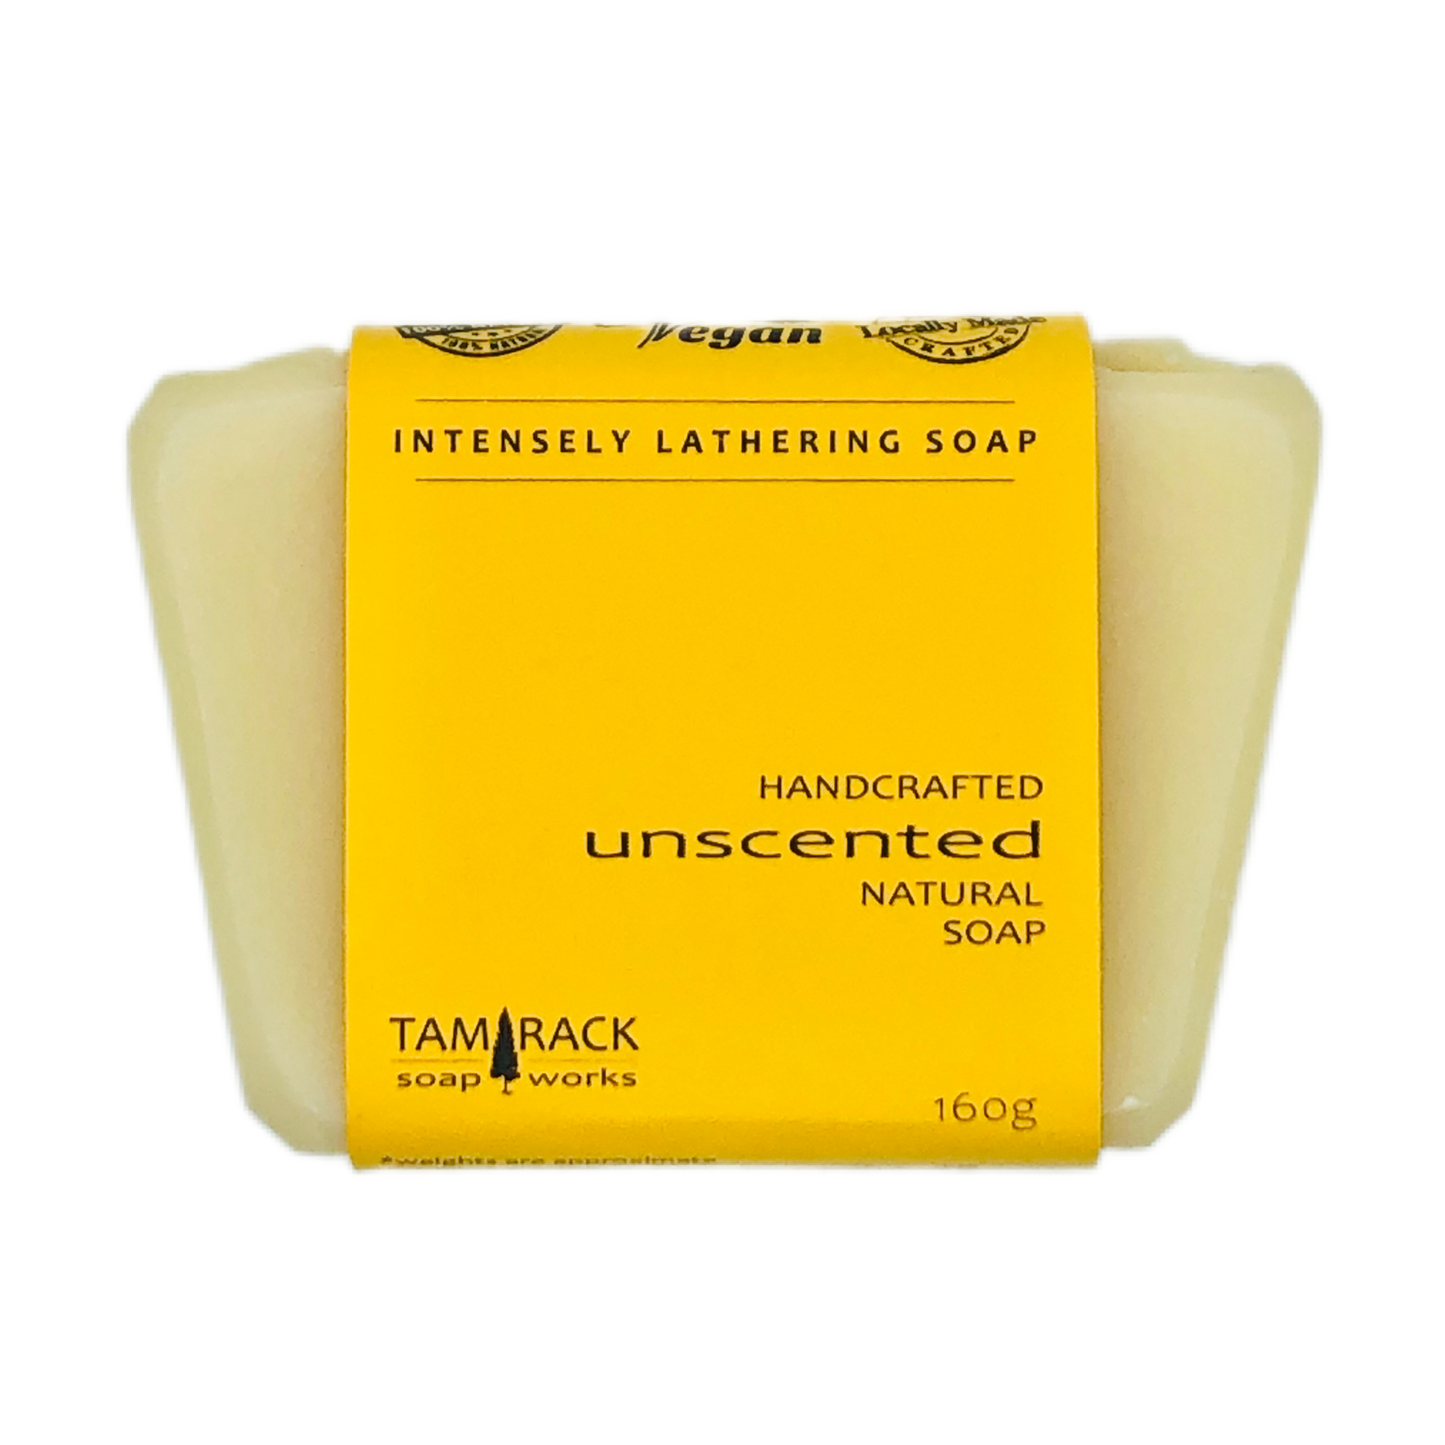 Unscented Soap Bar | Intensely Lathering Soap